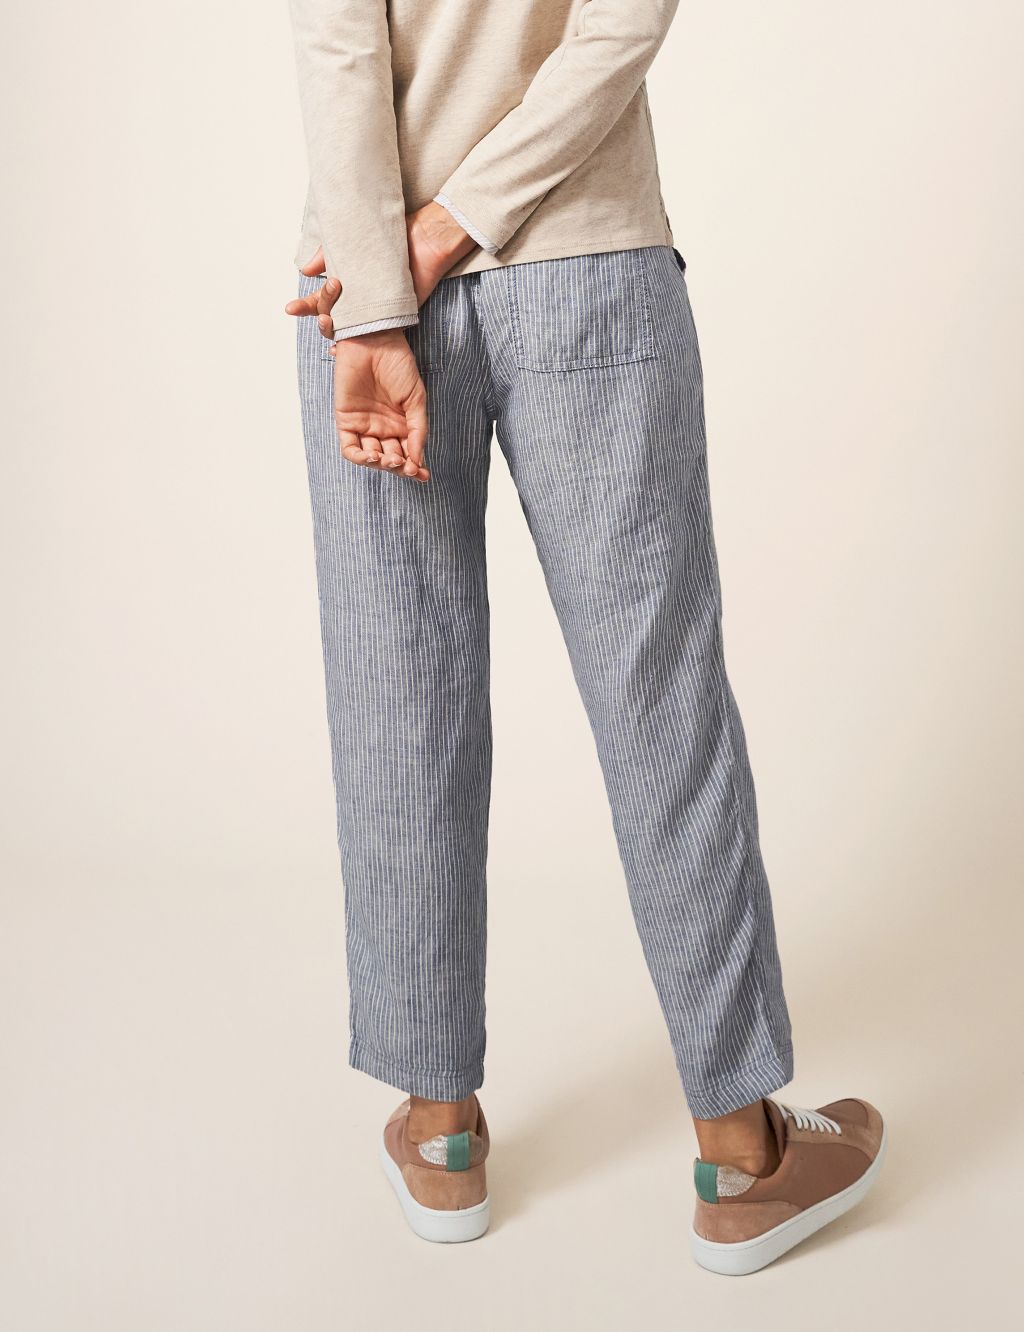 Pure Linen Striped Slim Fit Trousers image 4